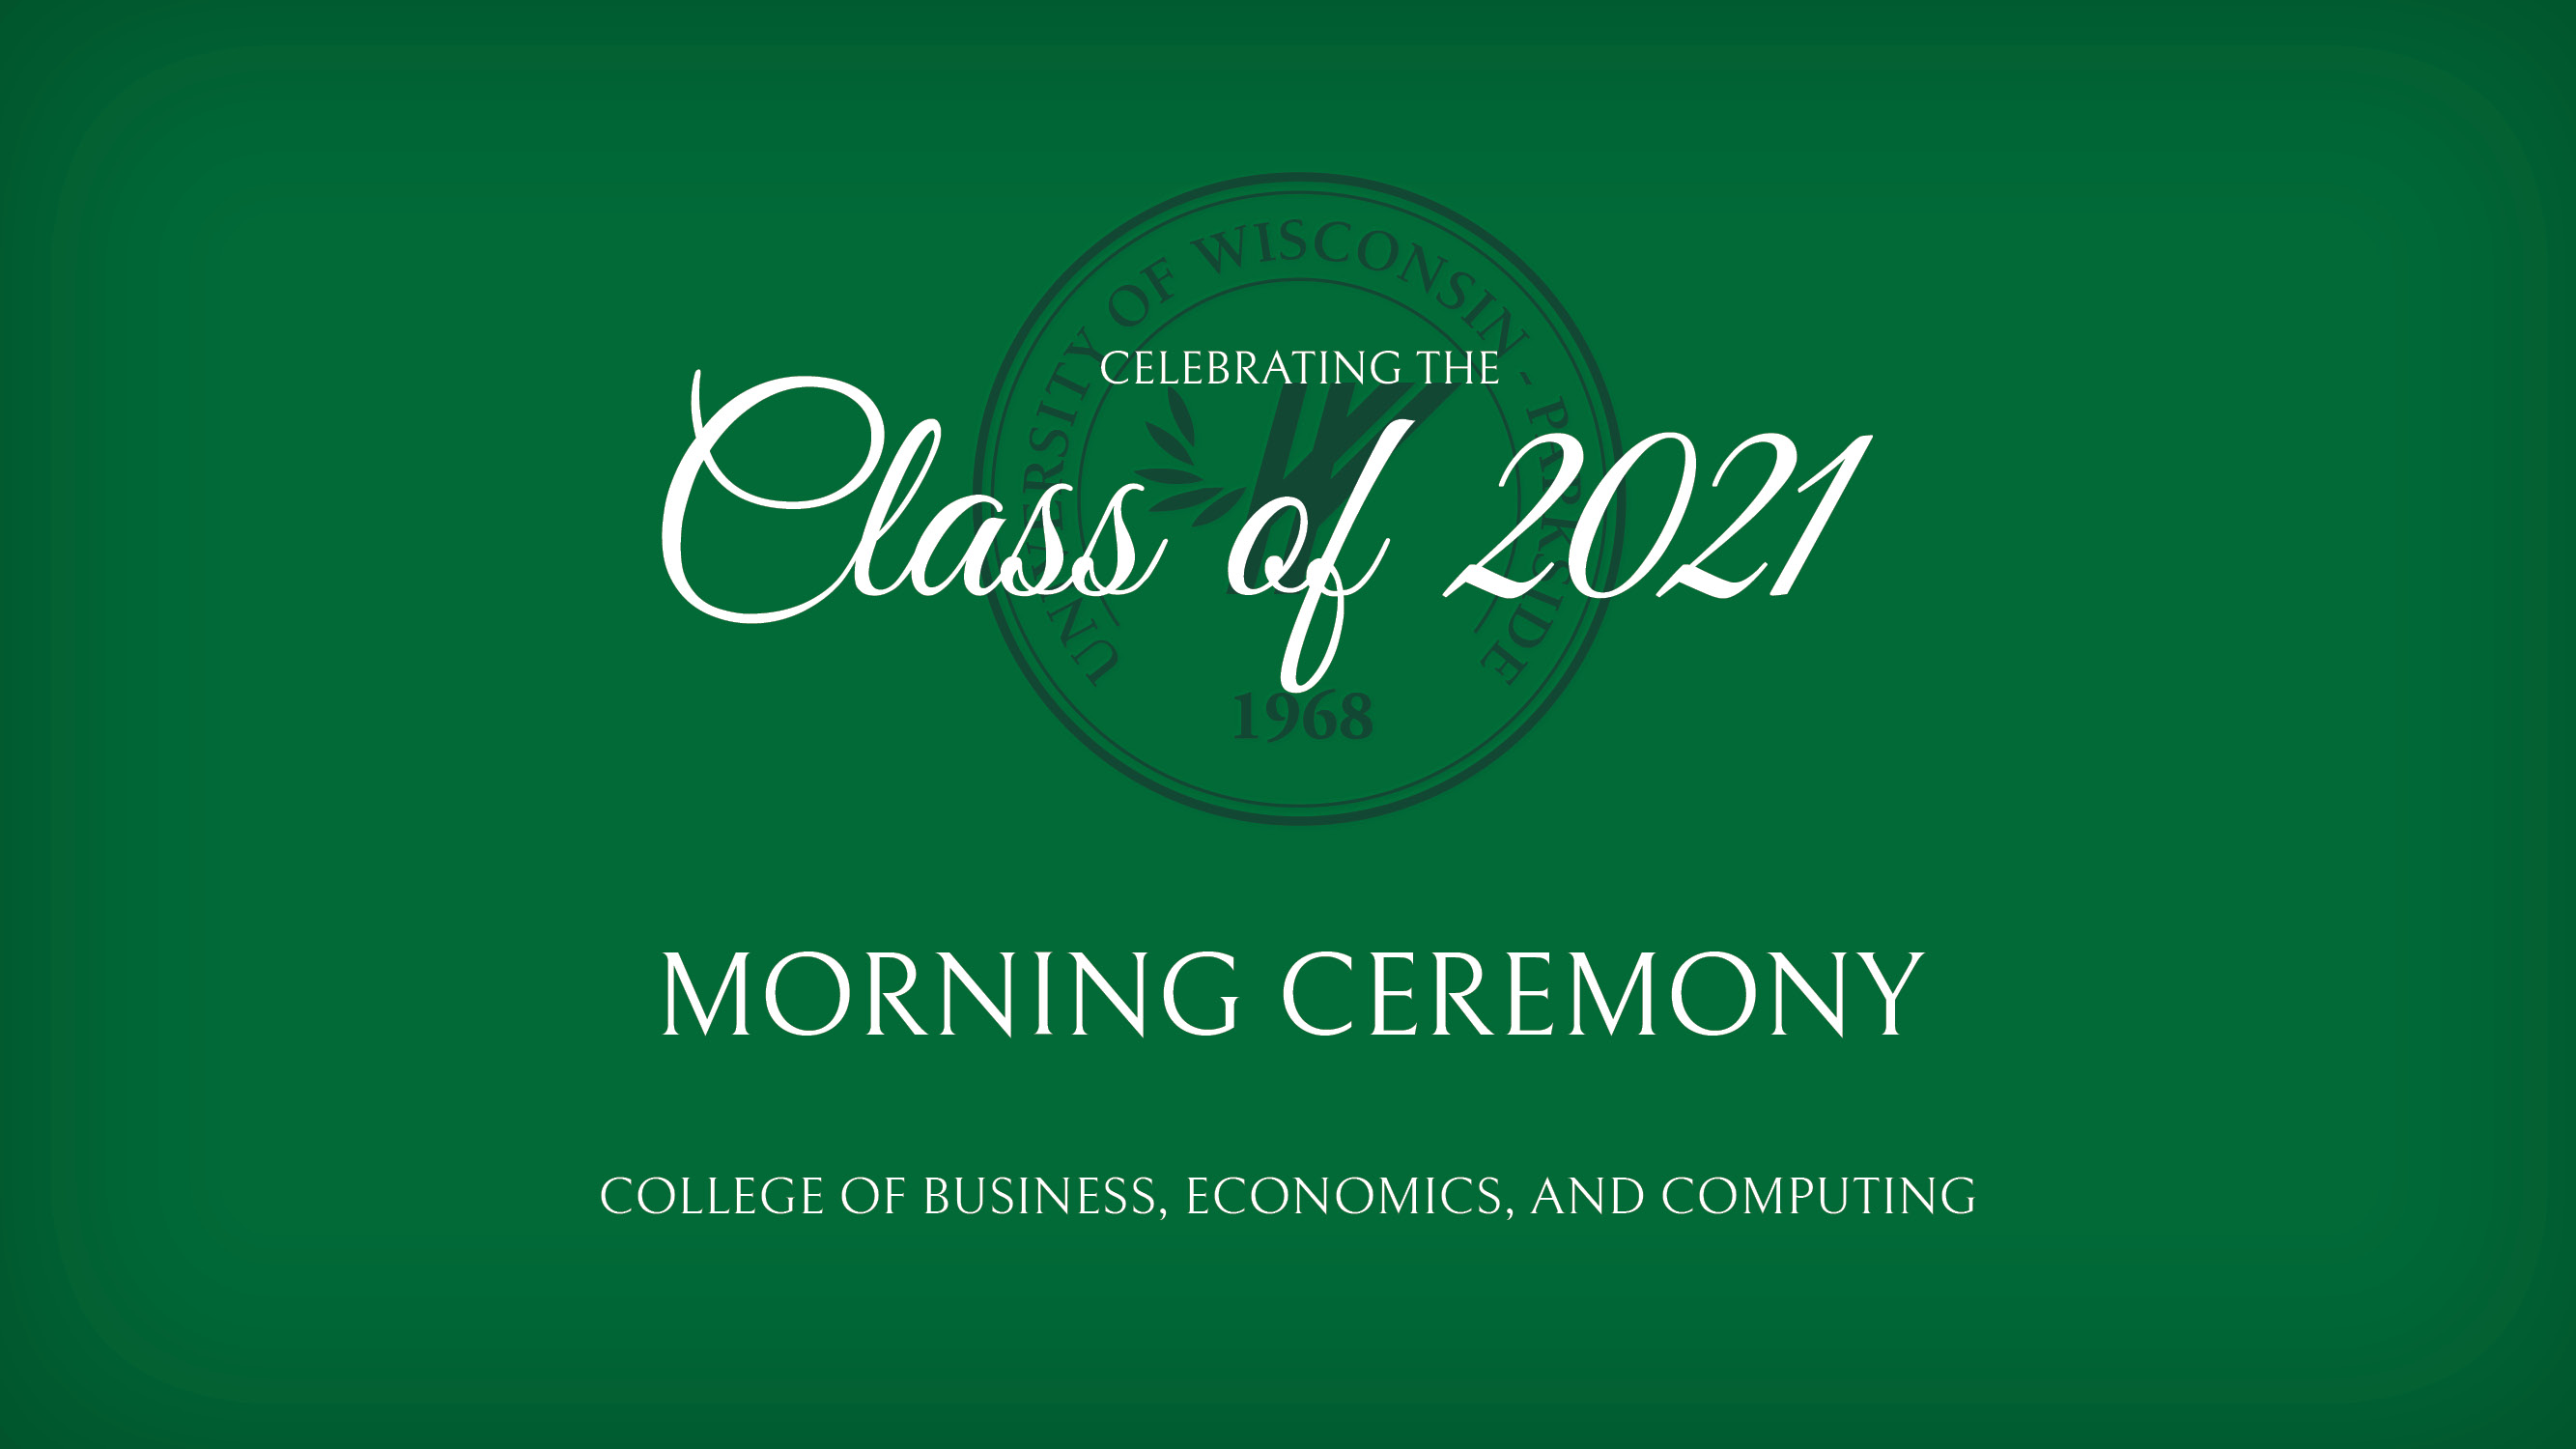 Dec 21 Commencement Ceremony (Morning)